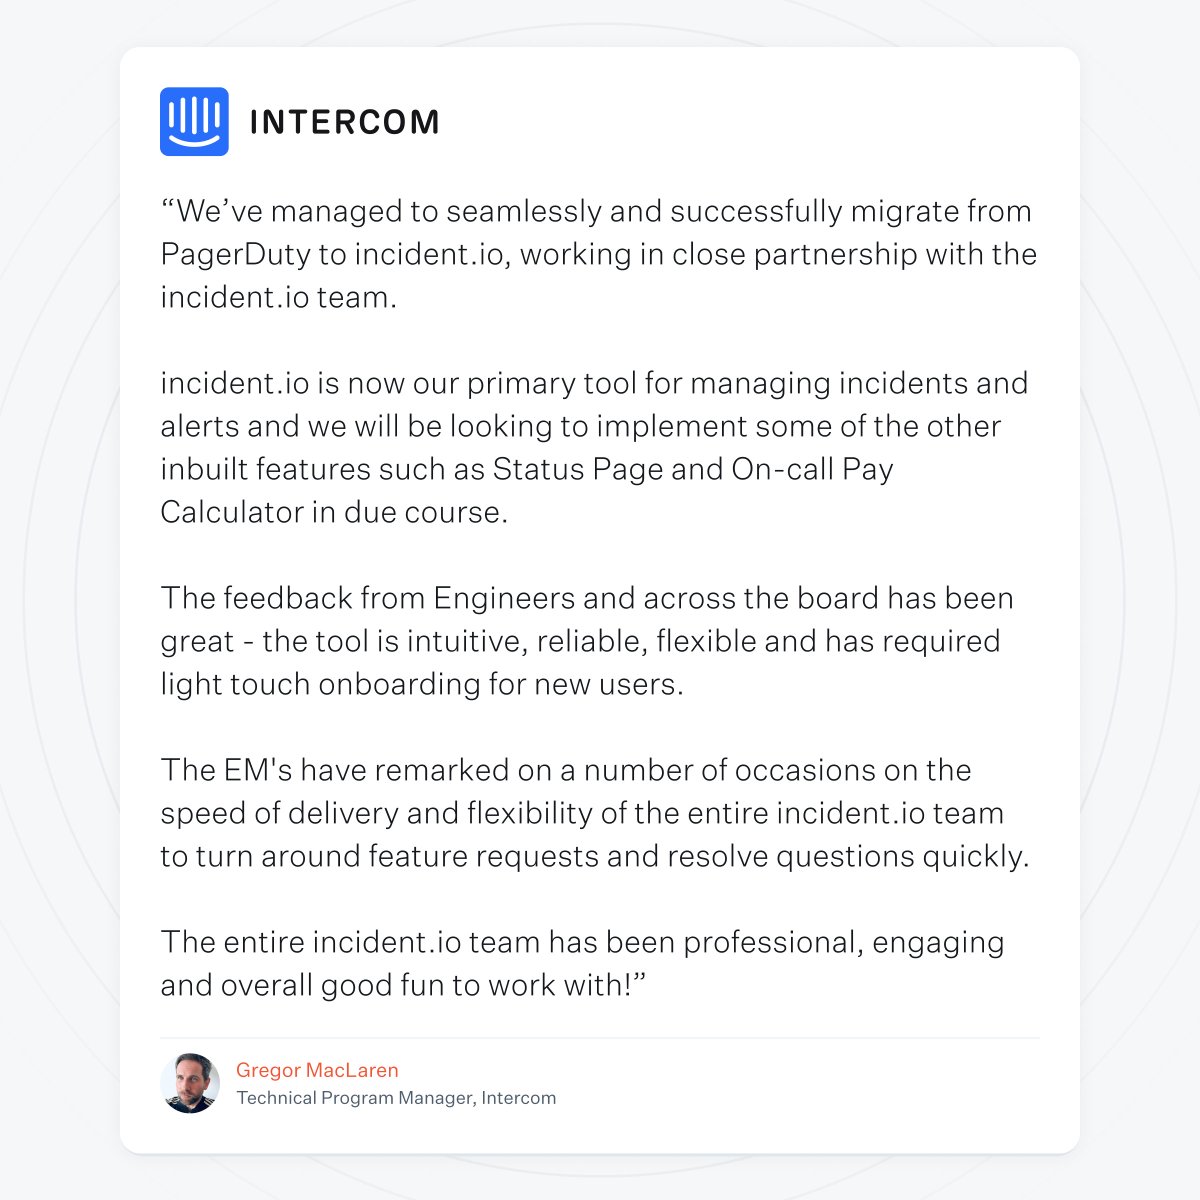 Customers are LOVING On-call ❤️ But it's not just the product itself. It's the quick delivery of feature requests and close collaboration with the team that have also earned high praise from companies like @intercom 🤝